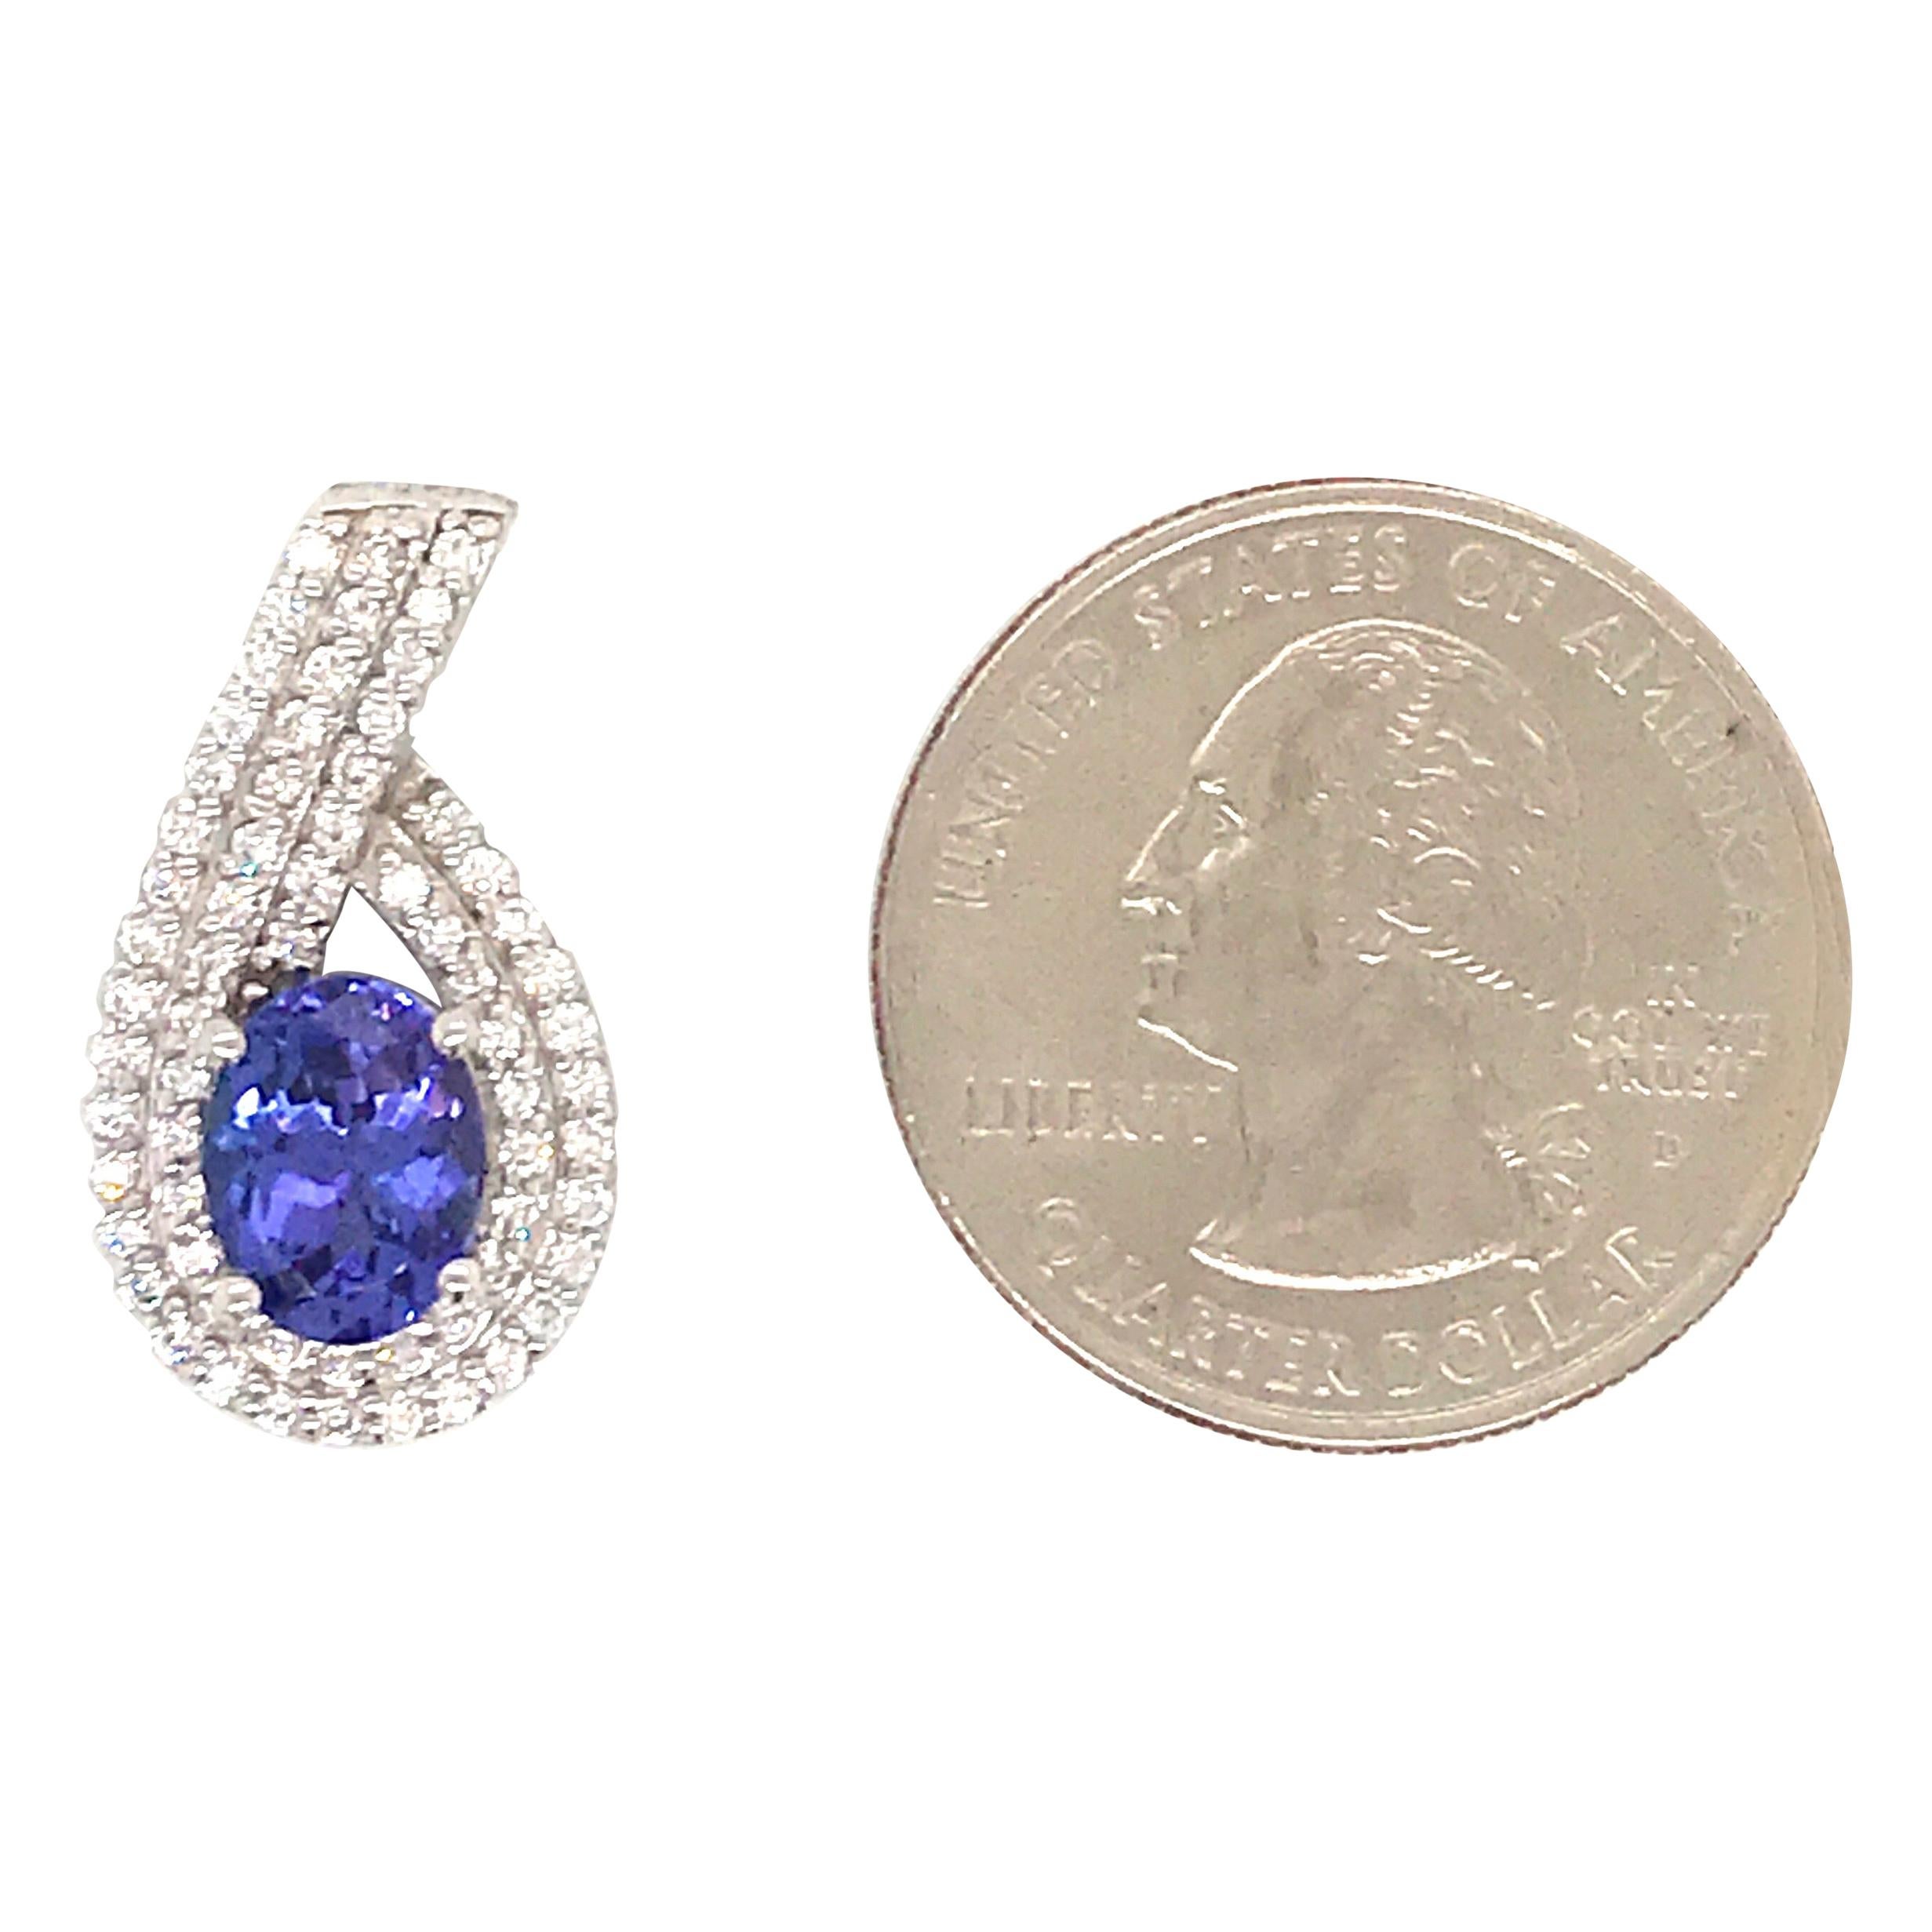 14K White Gold pendant featuring one oval cut tanzanite flanked with round brilliants weighing 0.52 carats. Comes with a 14k white gold chain, 16